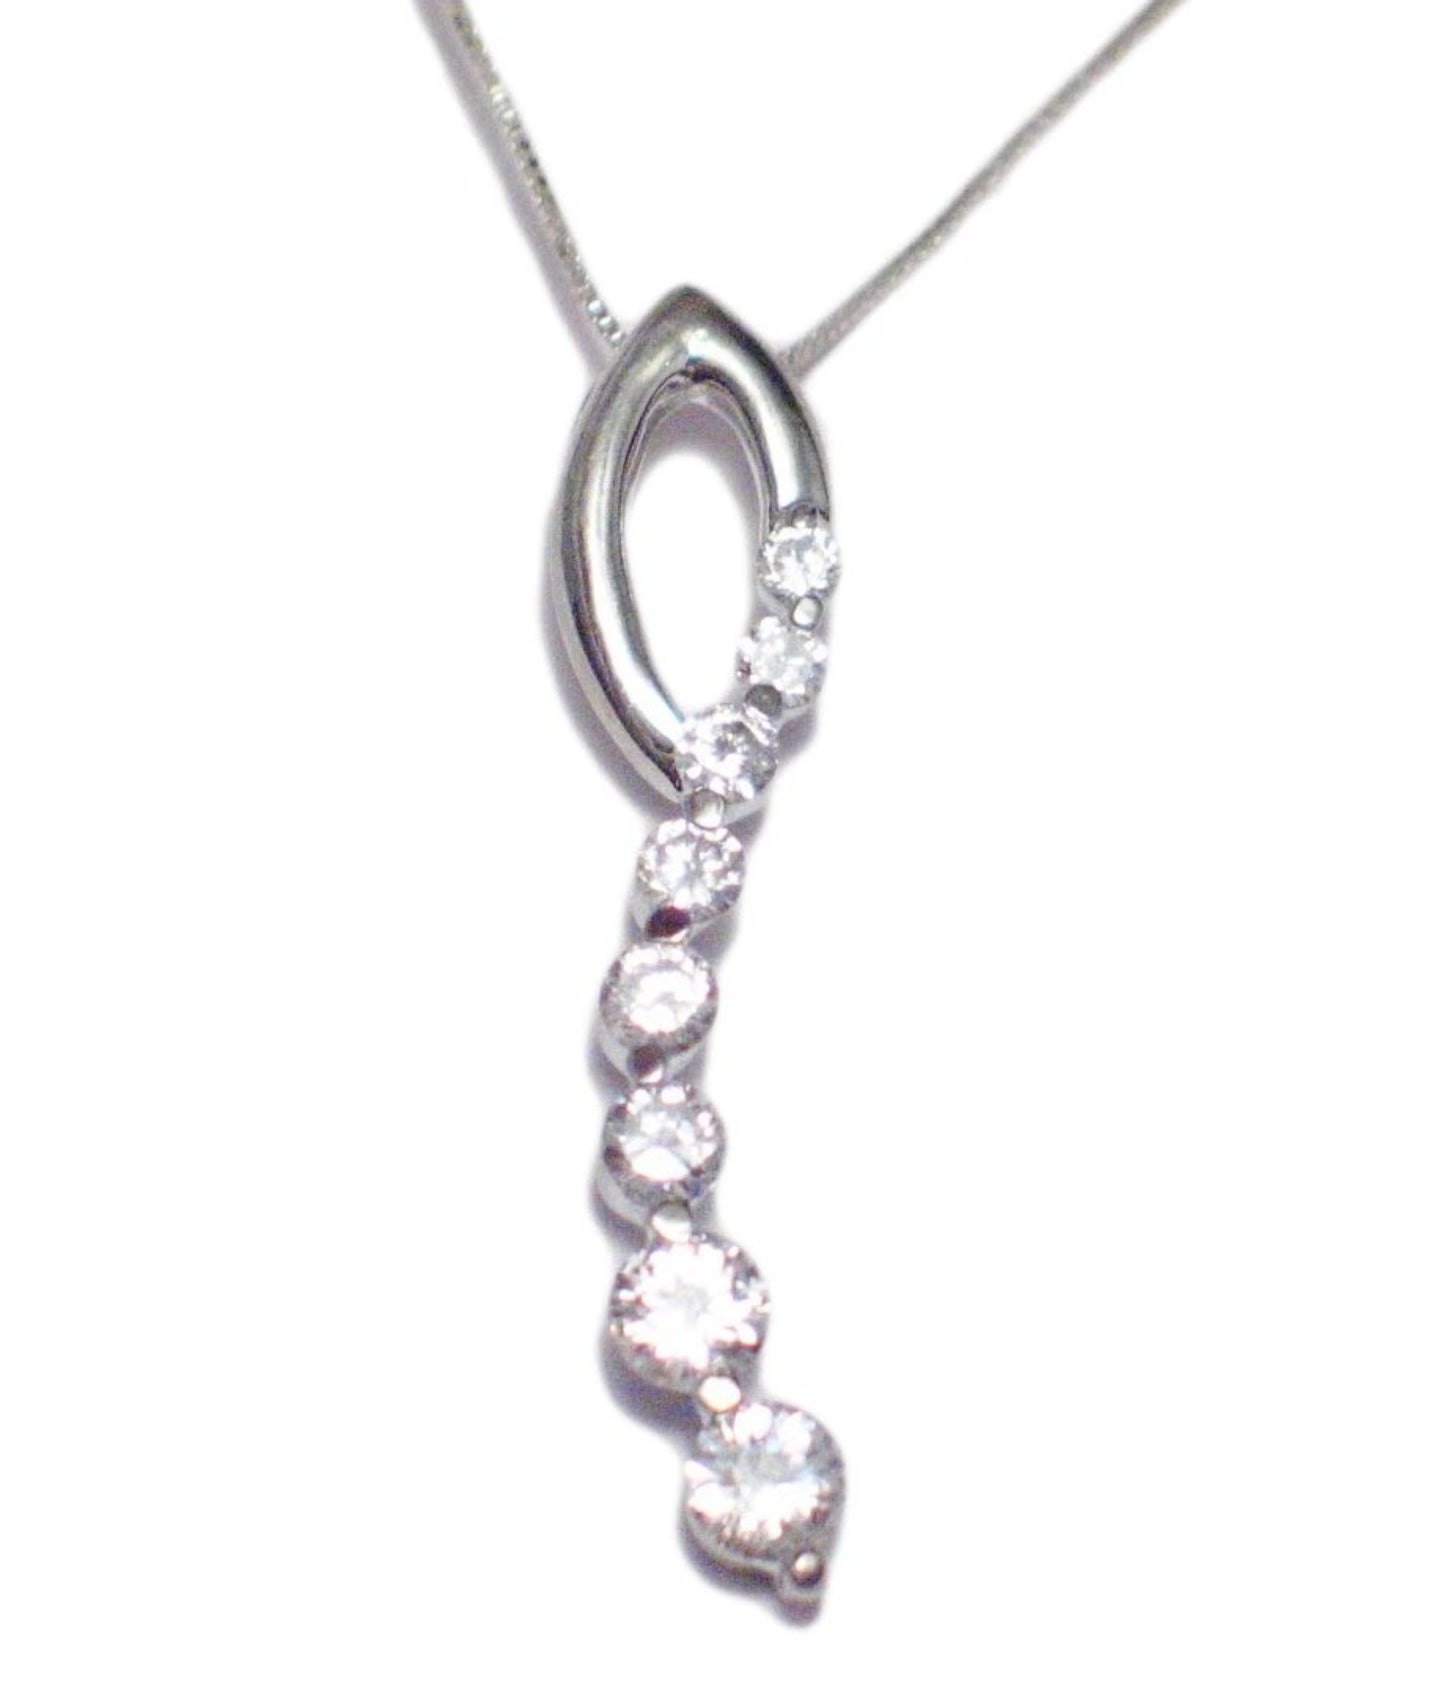 Necklaces | Sterling Silver White Cz Journey Pendant Necklace 18" | Chains